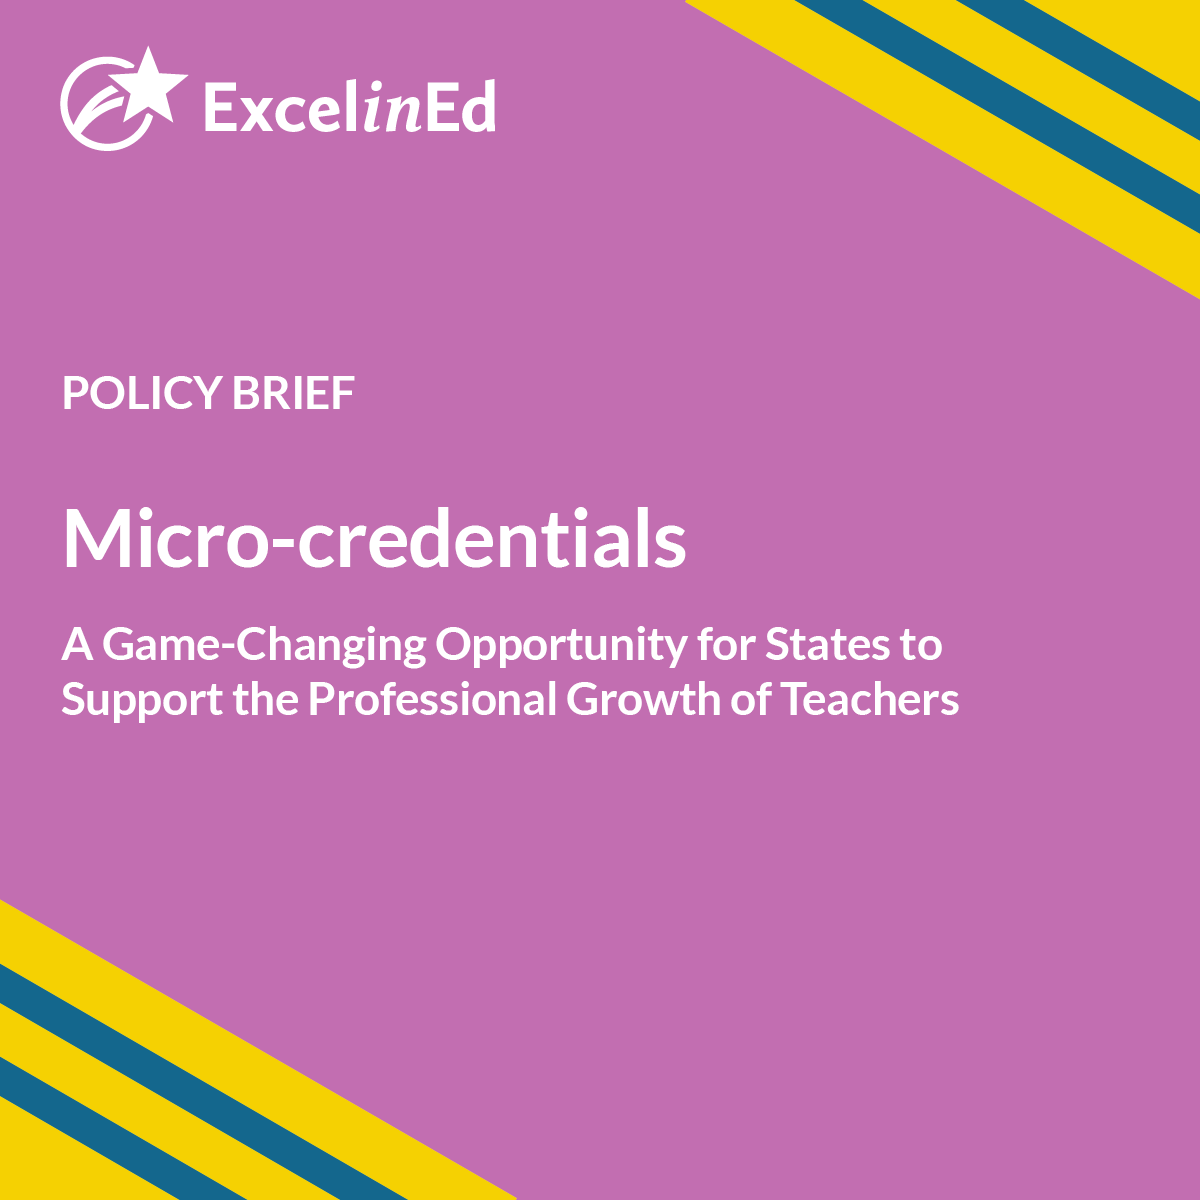 ExcelinEd - State Policy Brief onMicro-credentials